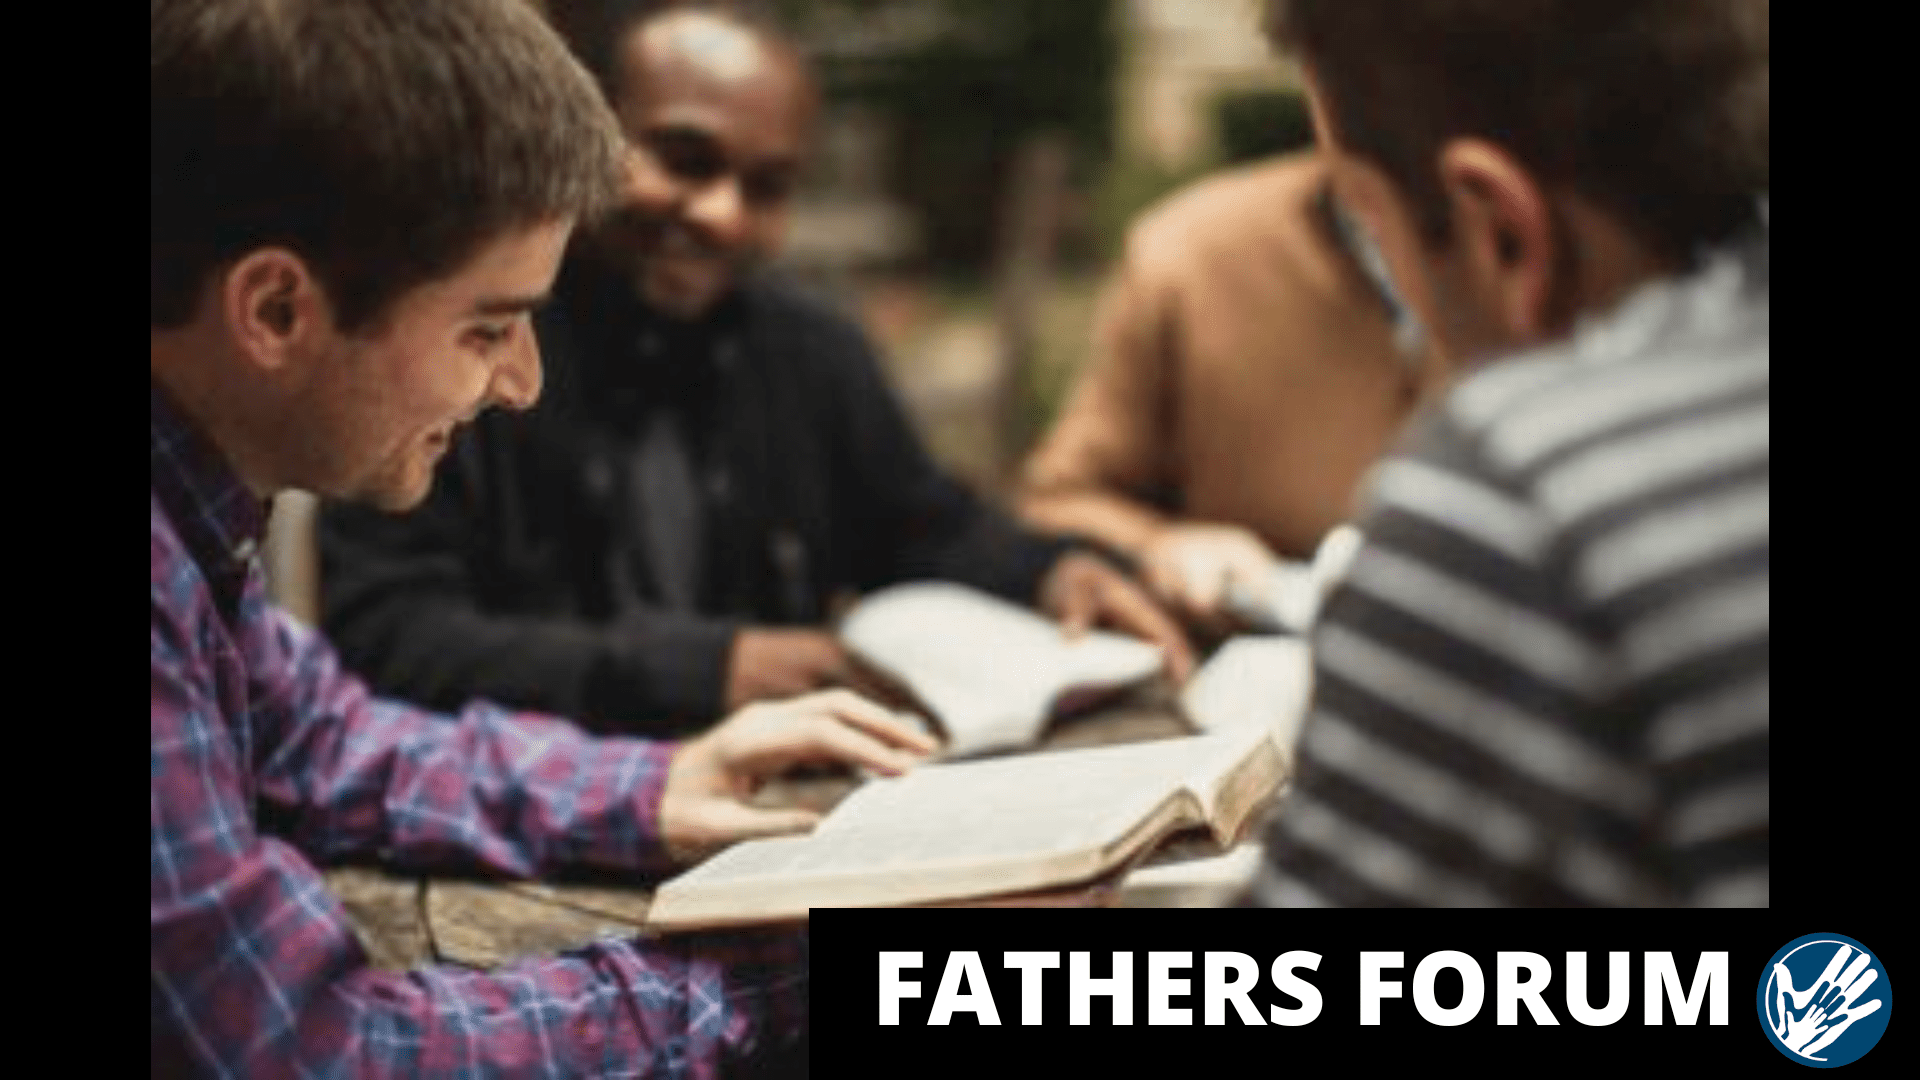 Small group of men gathered around a table with their Bibles opened. Words shown on bottom of image, "Fathers Forum".